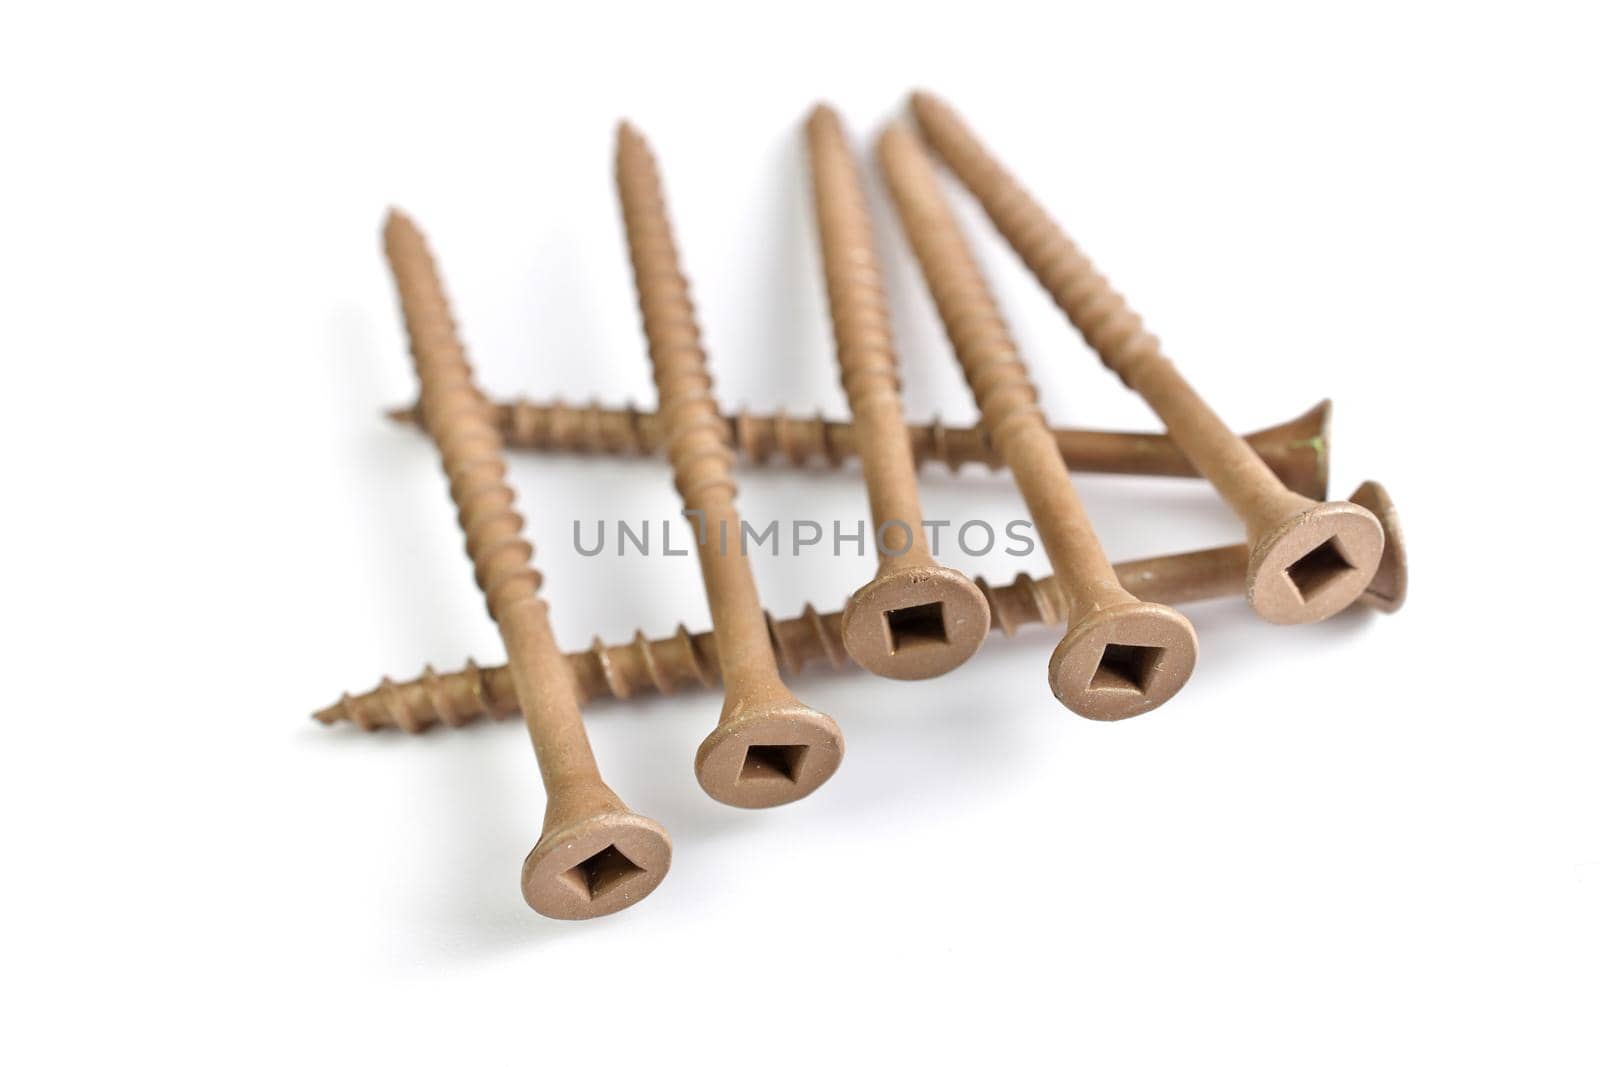 Brown Deck Screws Isolated on a White Background by markvandam